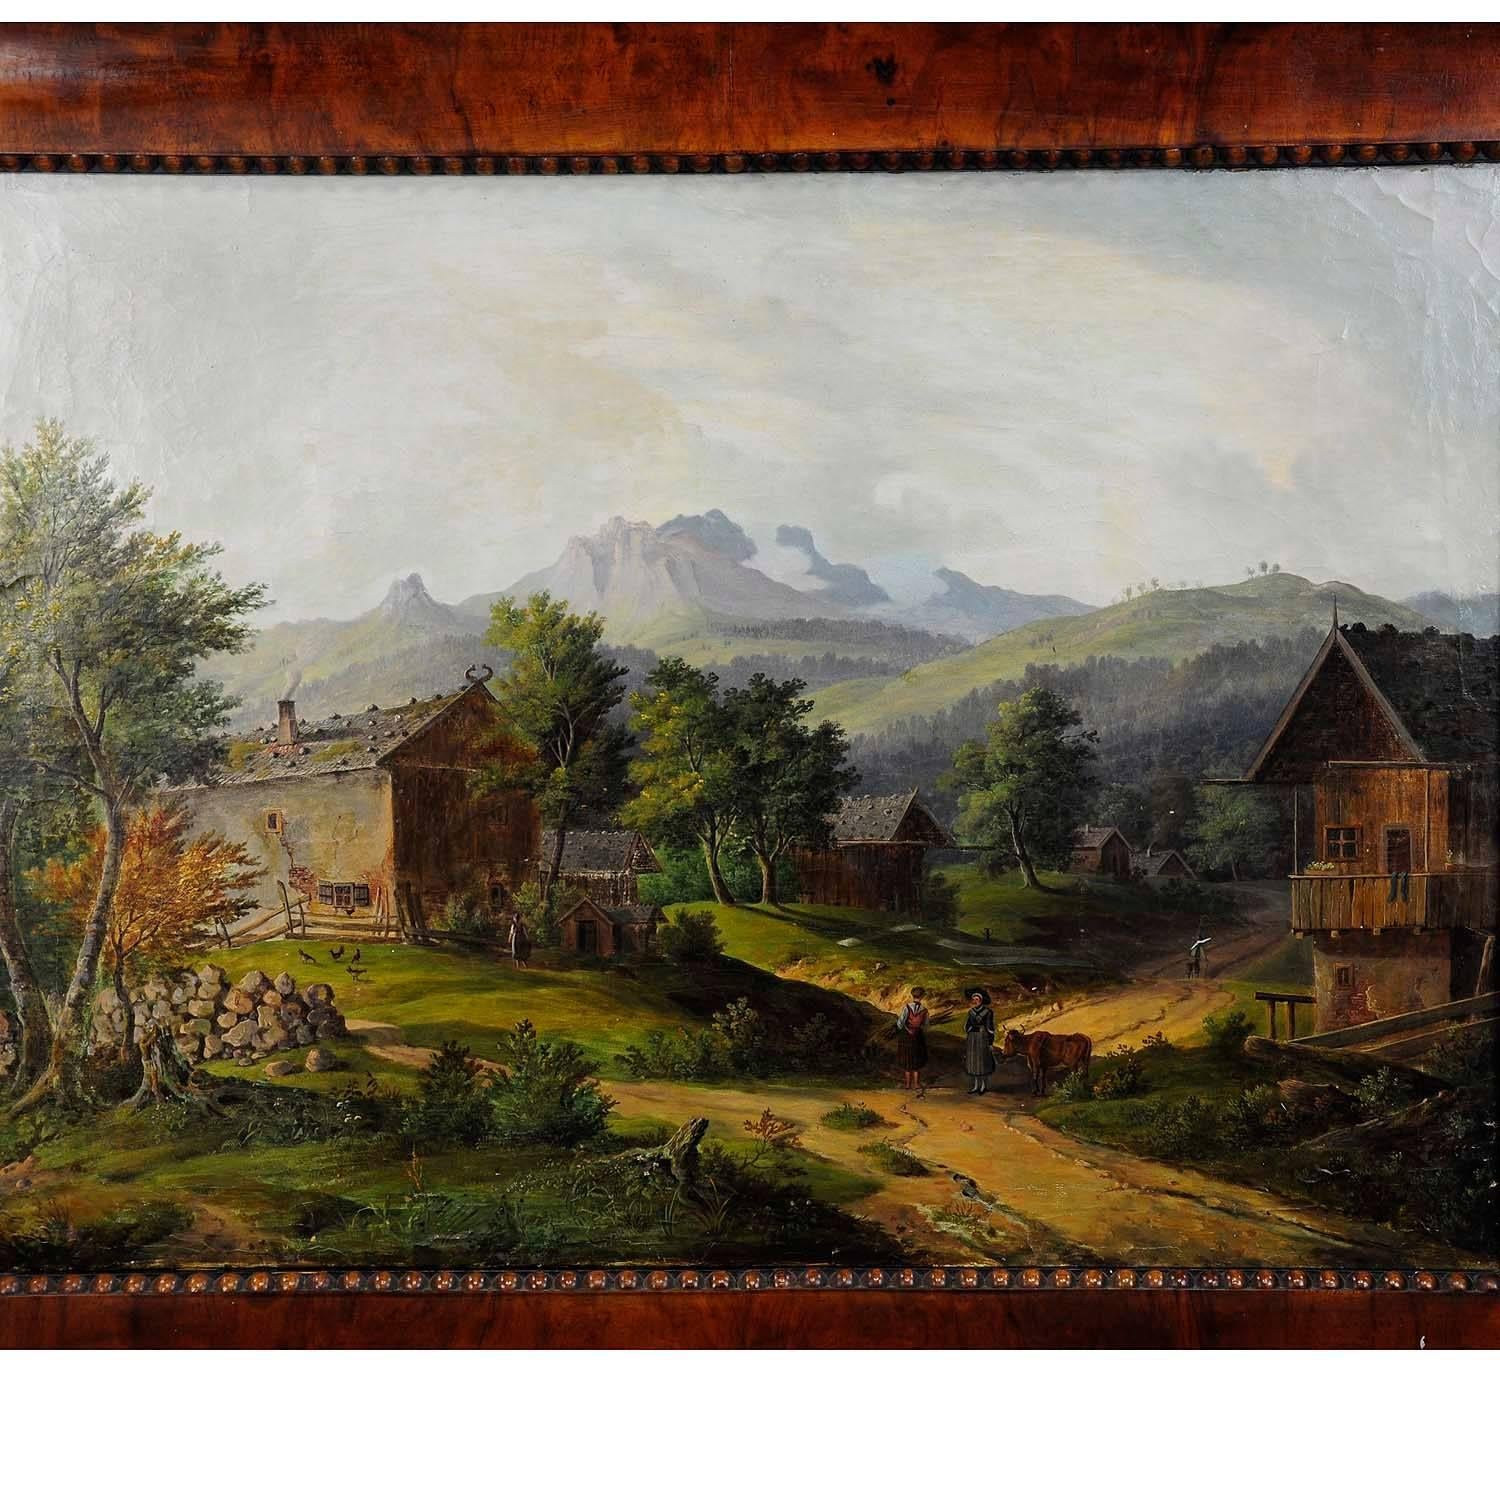 A village landscape painting depicting mountains in the back with a 19th century black forest village showing the village live in front. Oil on canvas laminated with new canvas. Framed with antique decorative nutwood frame. Unsigned, painted in the